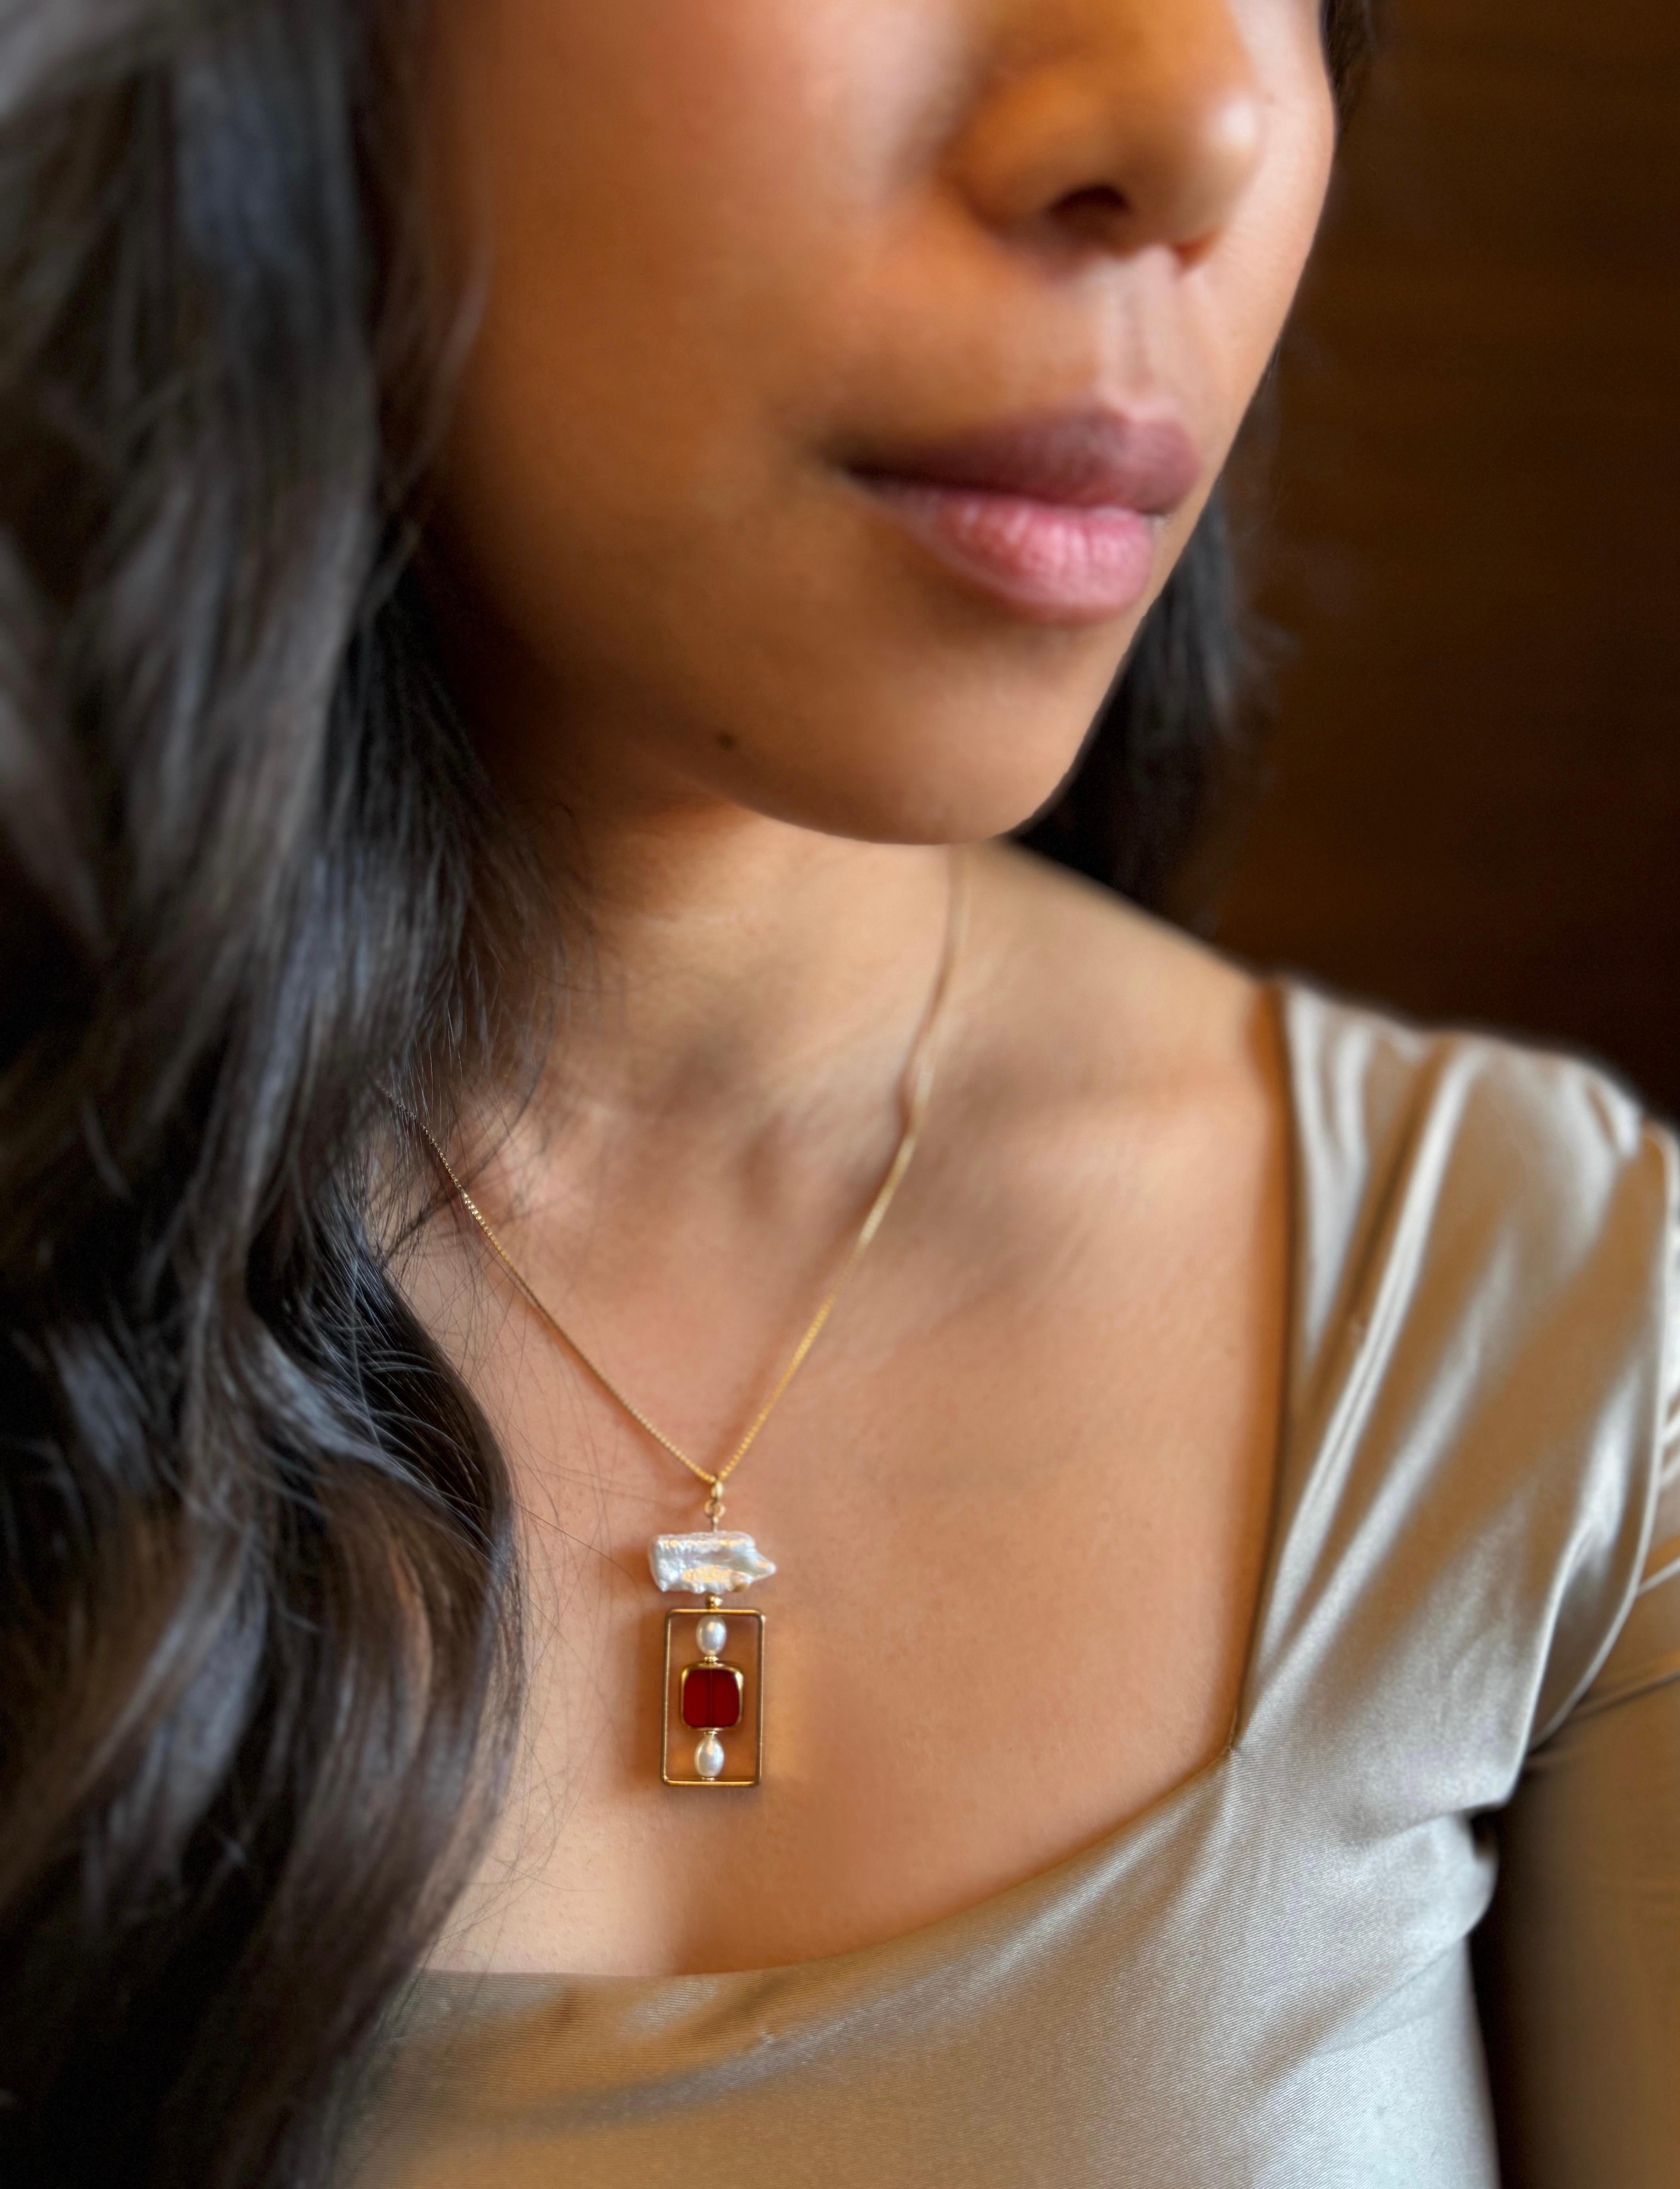 The necklace is composed of German Vintage Glass Beads that are edged with 24K gold. It is incorporated with freshwater pearls set in a rectangular geometric frame with an 18-inch gold-fill chain.

The vintage glass beads that are framed with 24K